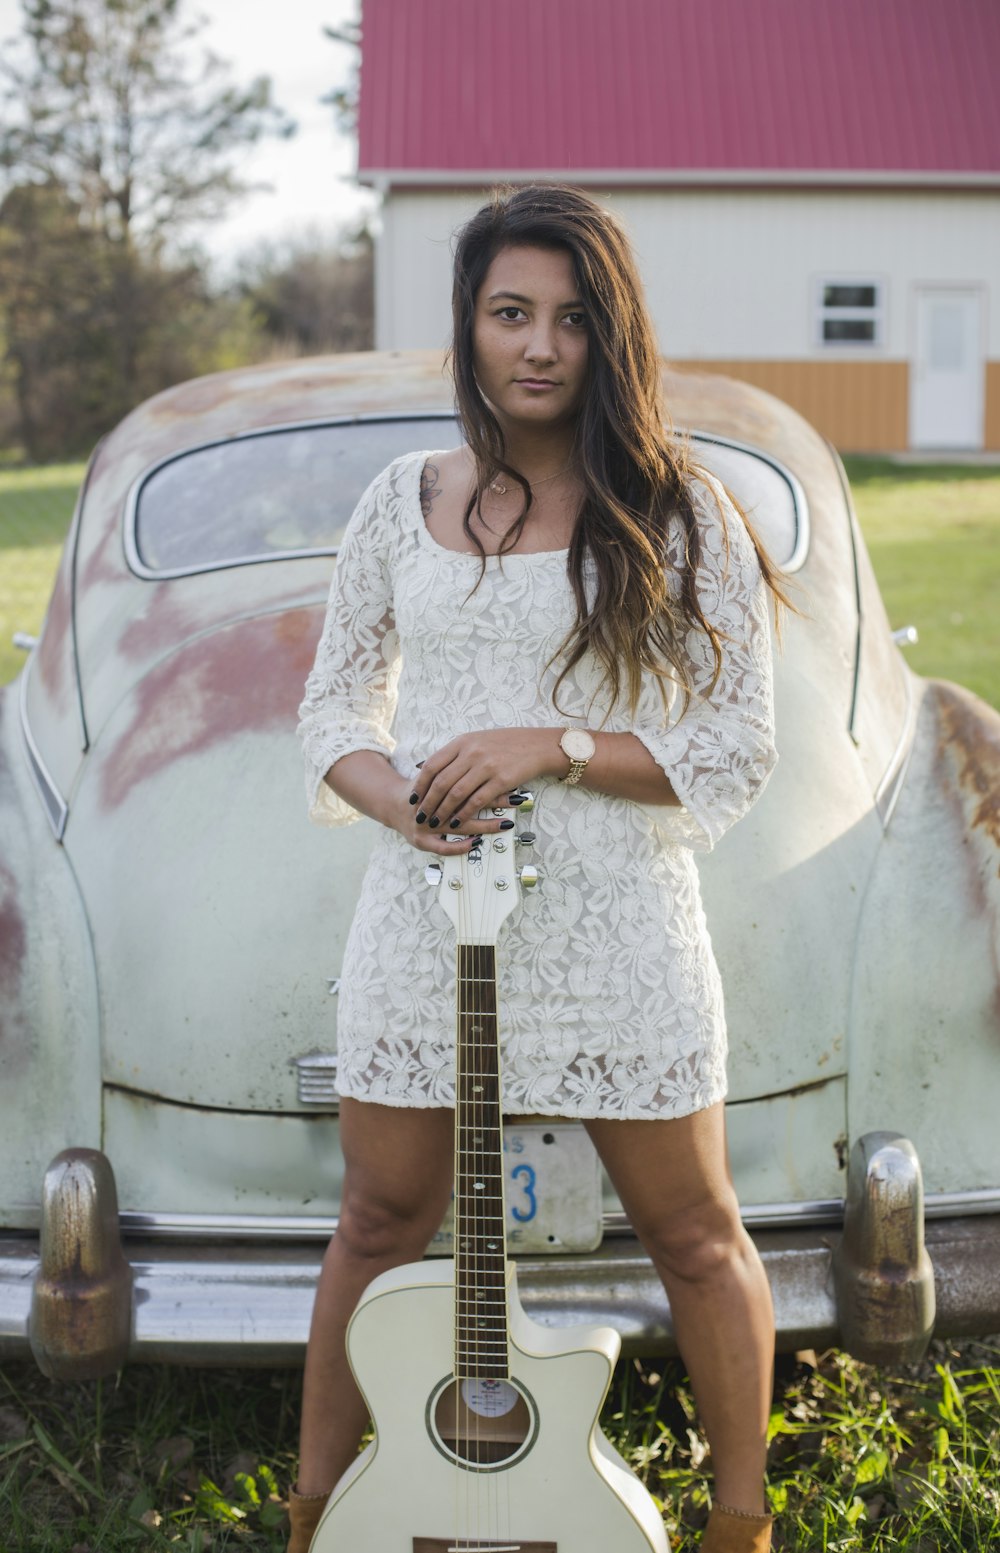 A woman in a dress holding a guitar in front of an older white car.